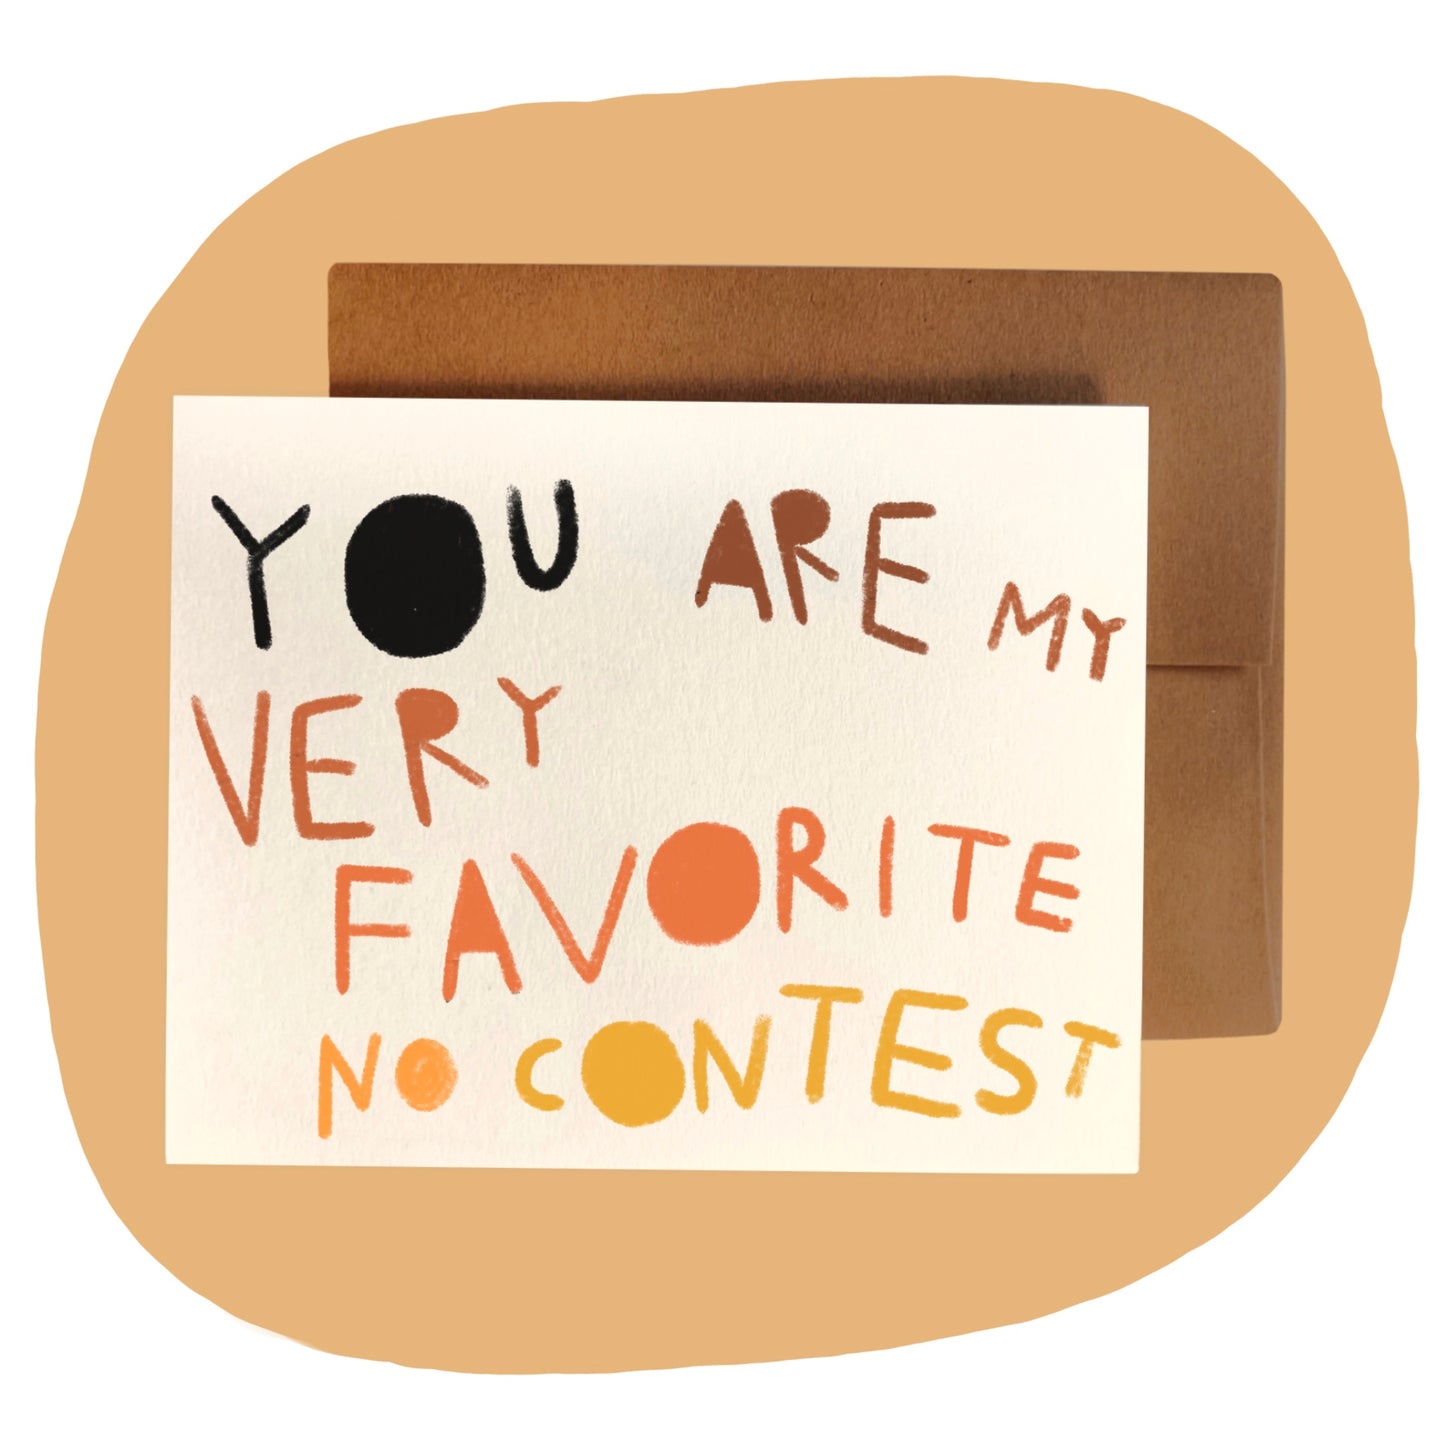 YOU ARE MY VERY FAVORITE NO CONTEST Card